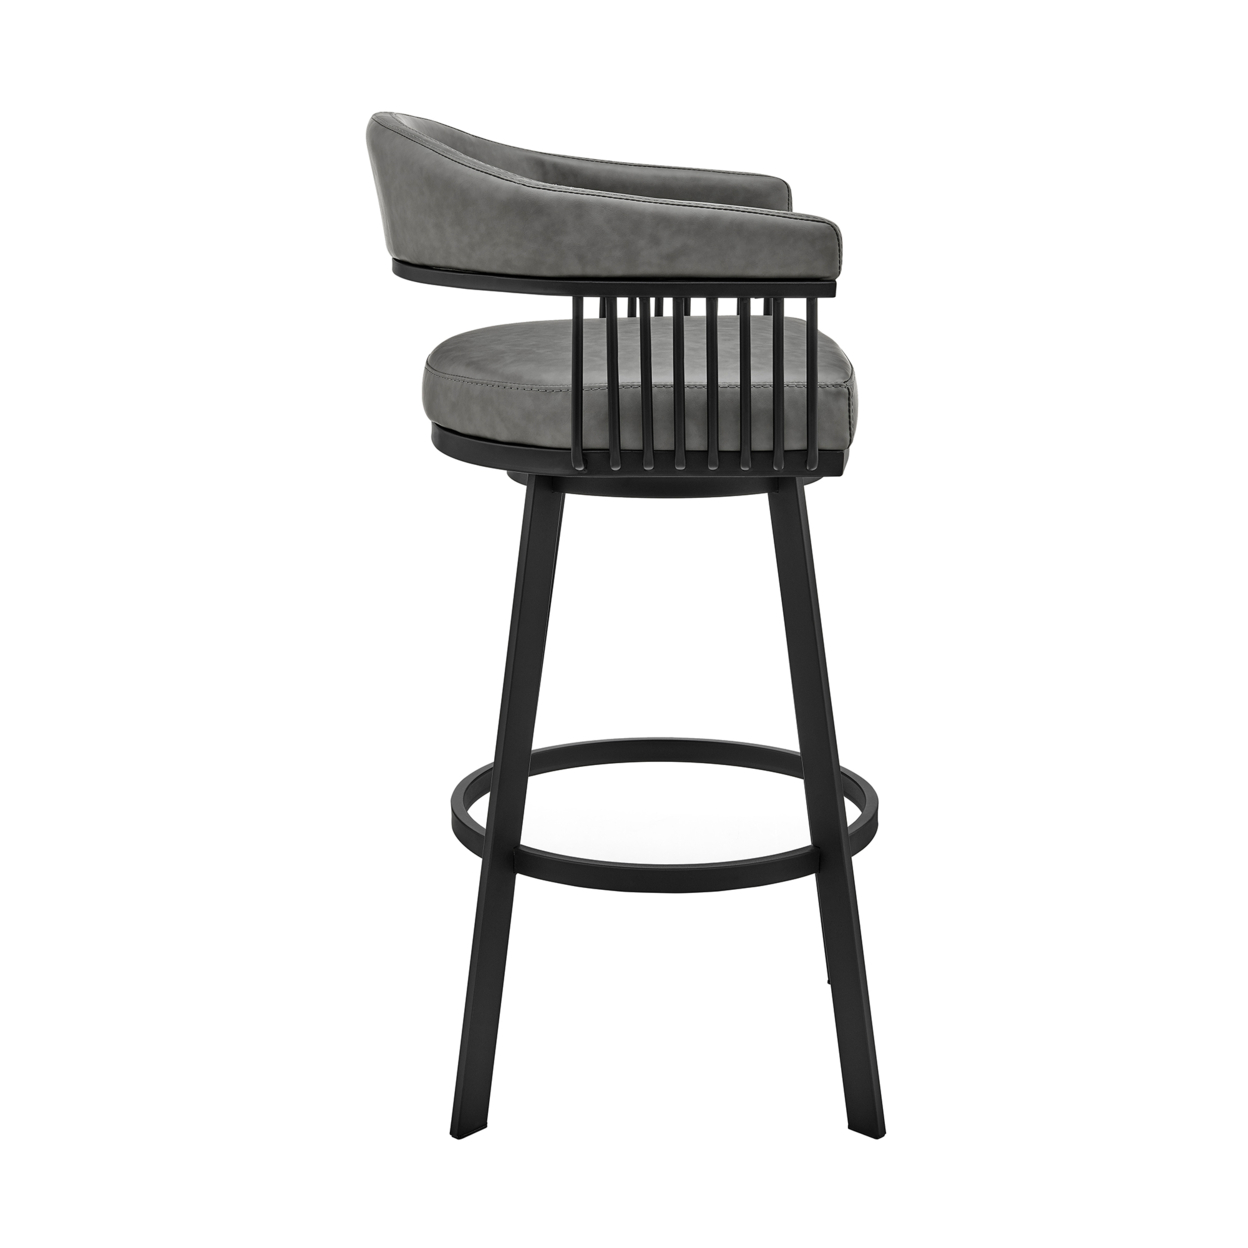 Swivel Barstool With Open Design Metal Frame And Slatted Arms, Gray And Black- Saltoro Sherpi